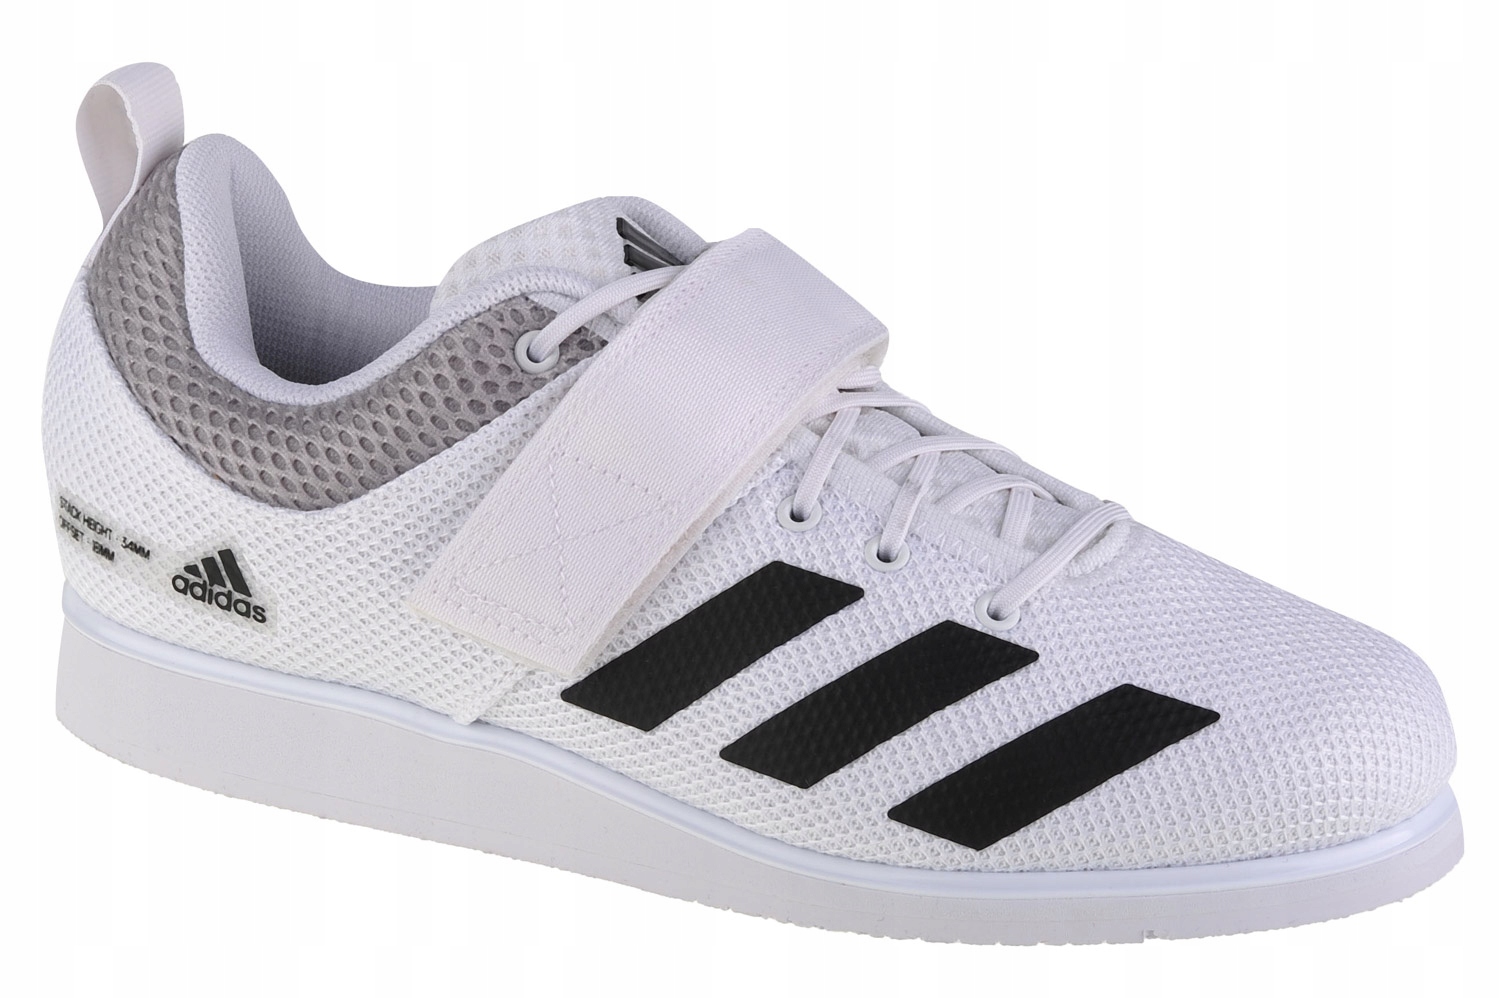 Topánky Adidas Powerlift 5 Weightlifting GY8919 - 44